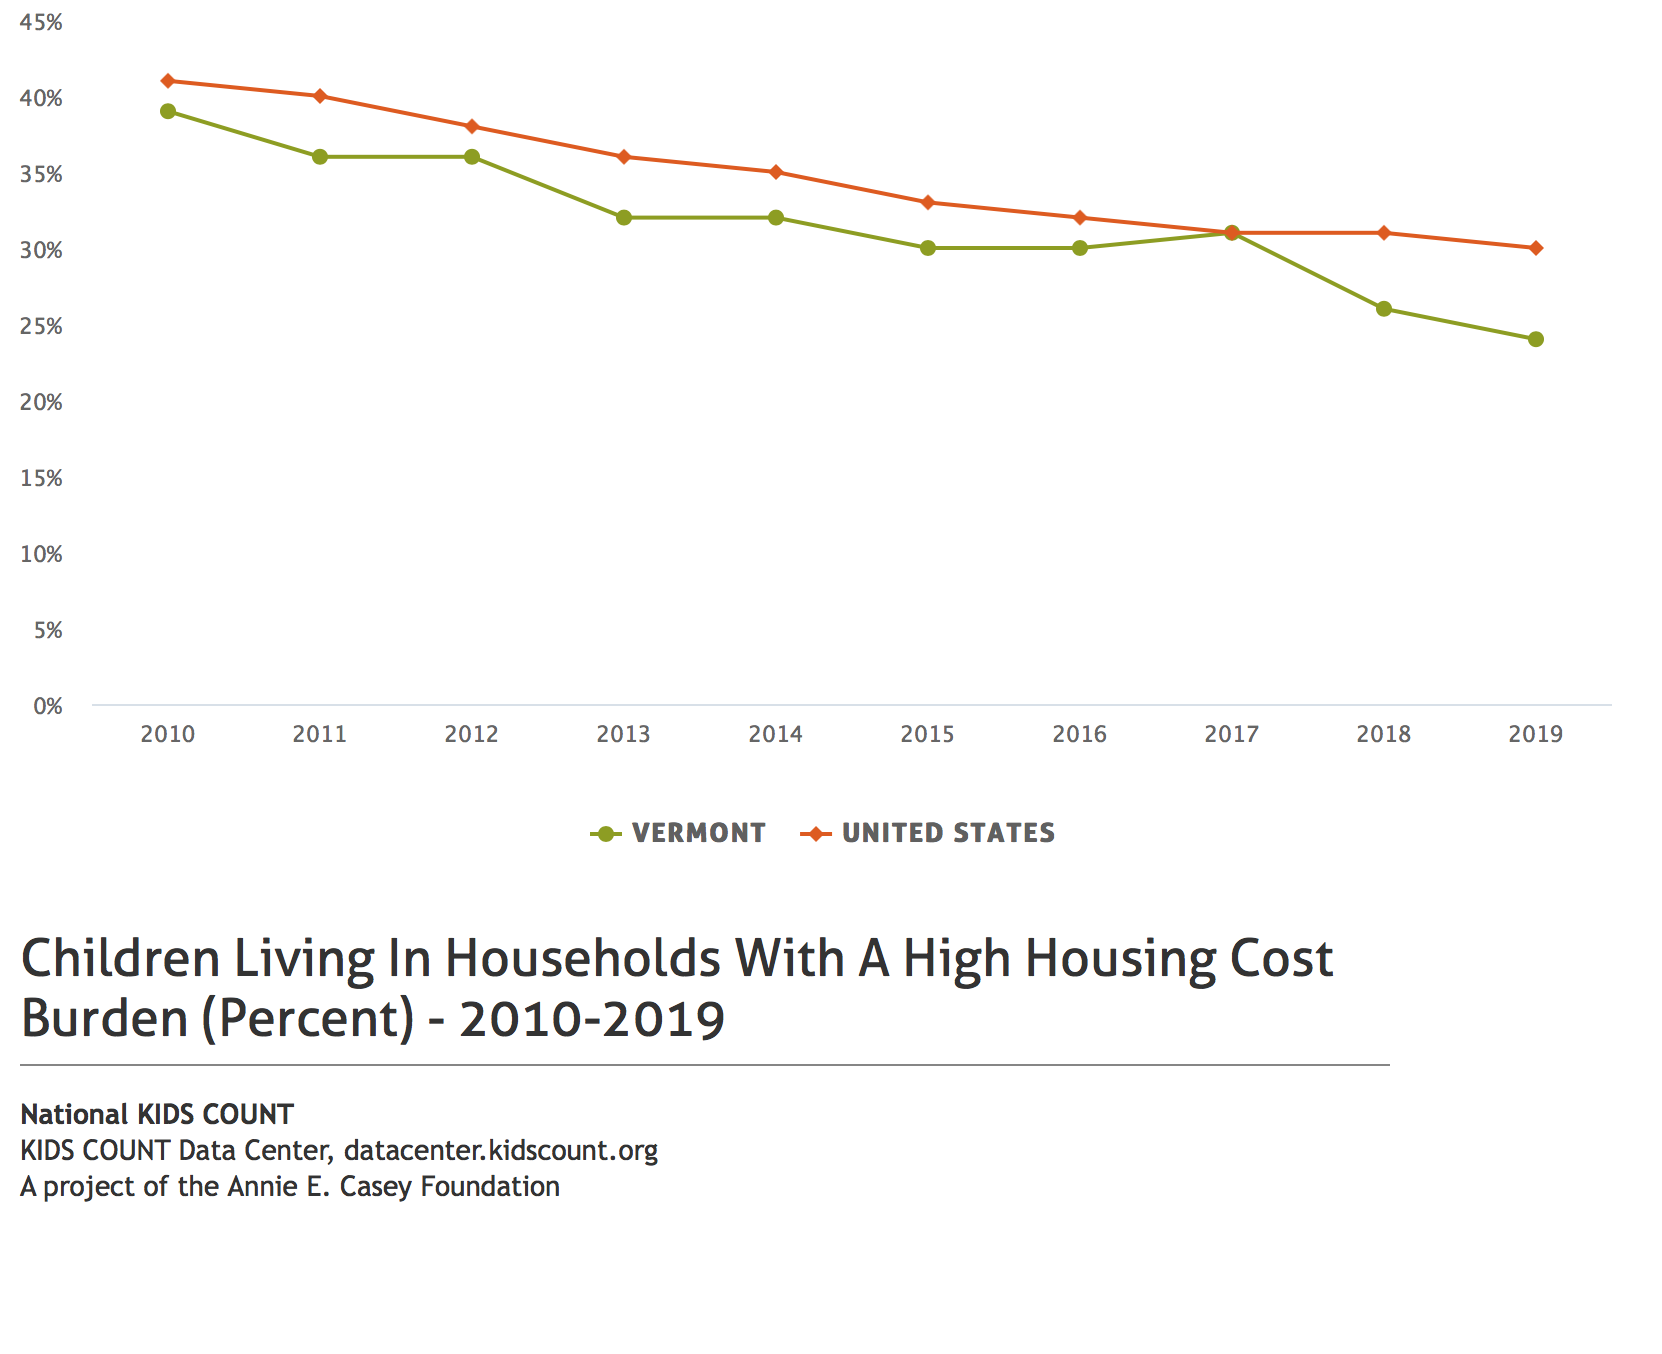 Children living in households with a high housing cost burden